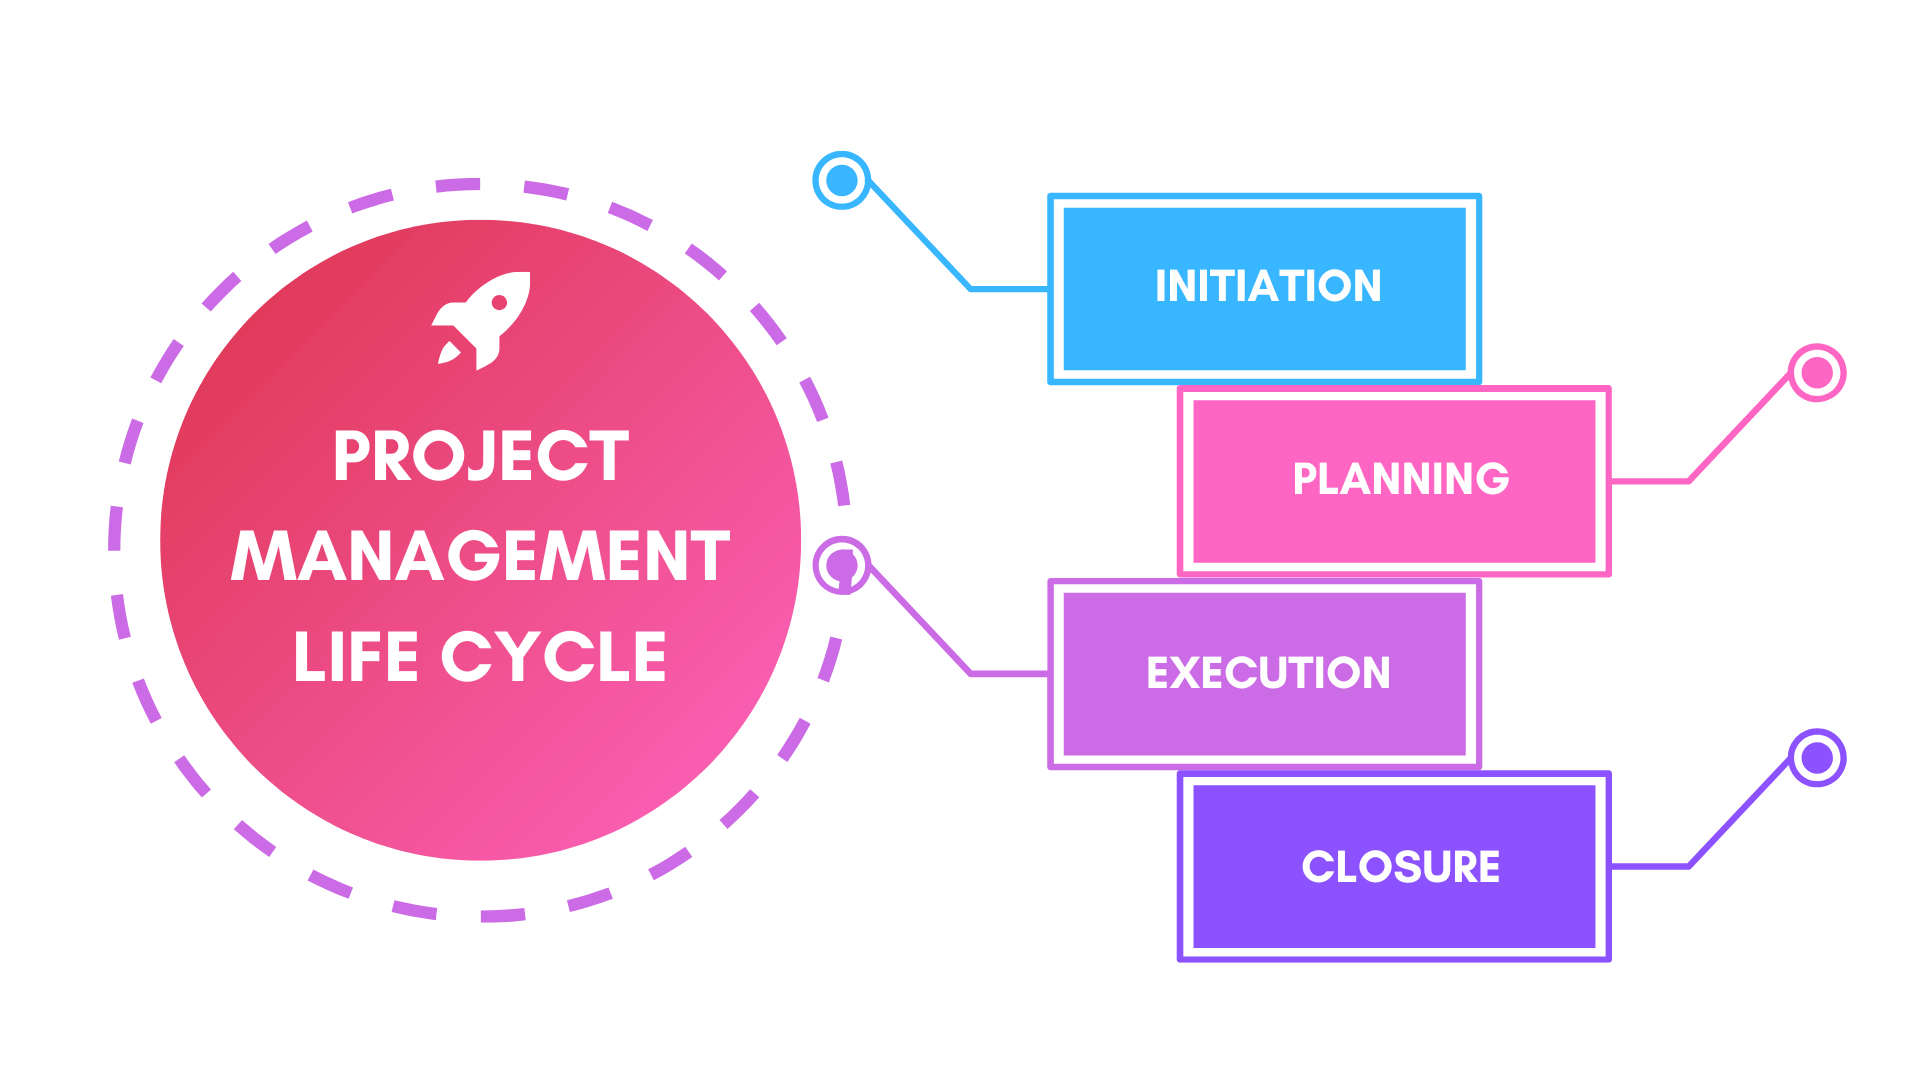 Project Management Life cycle